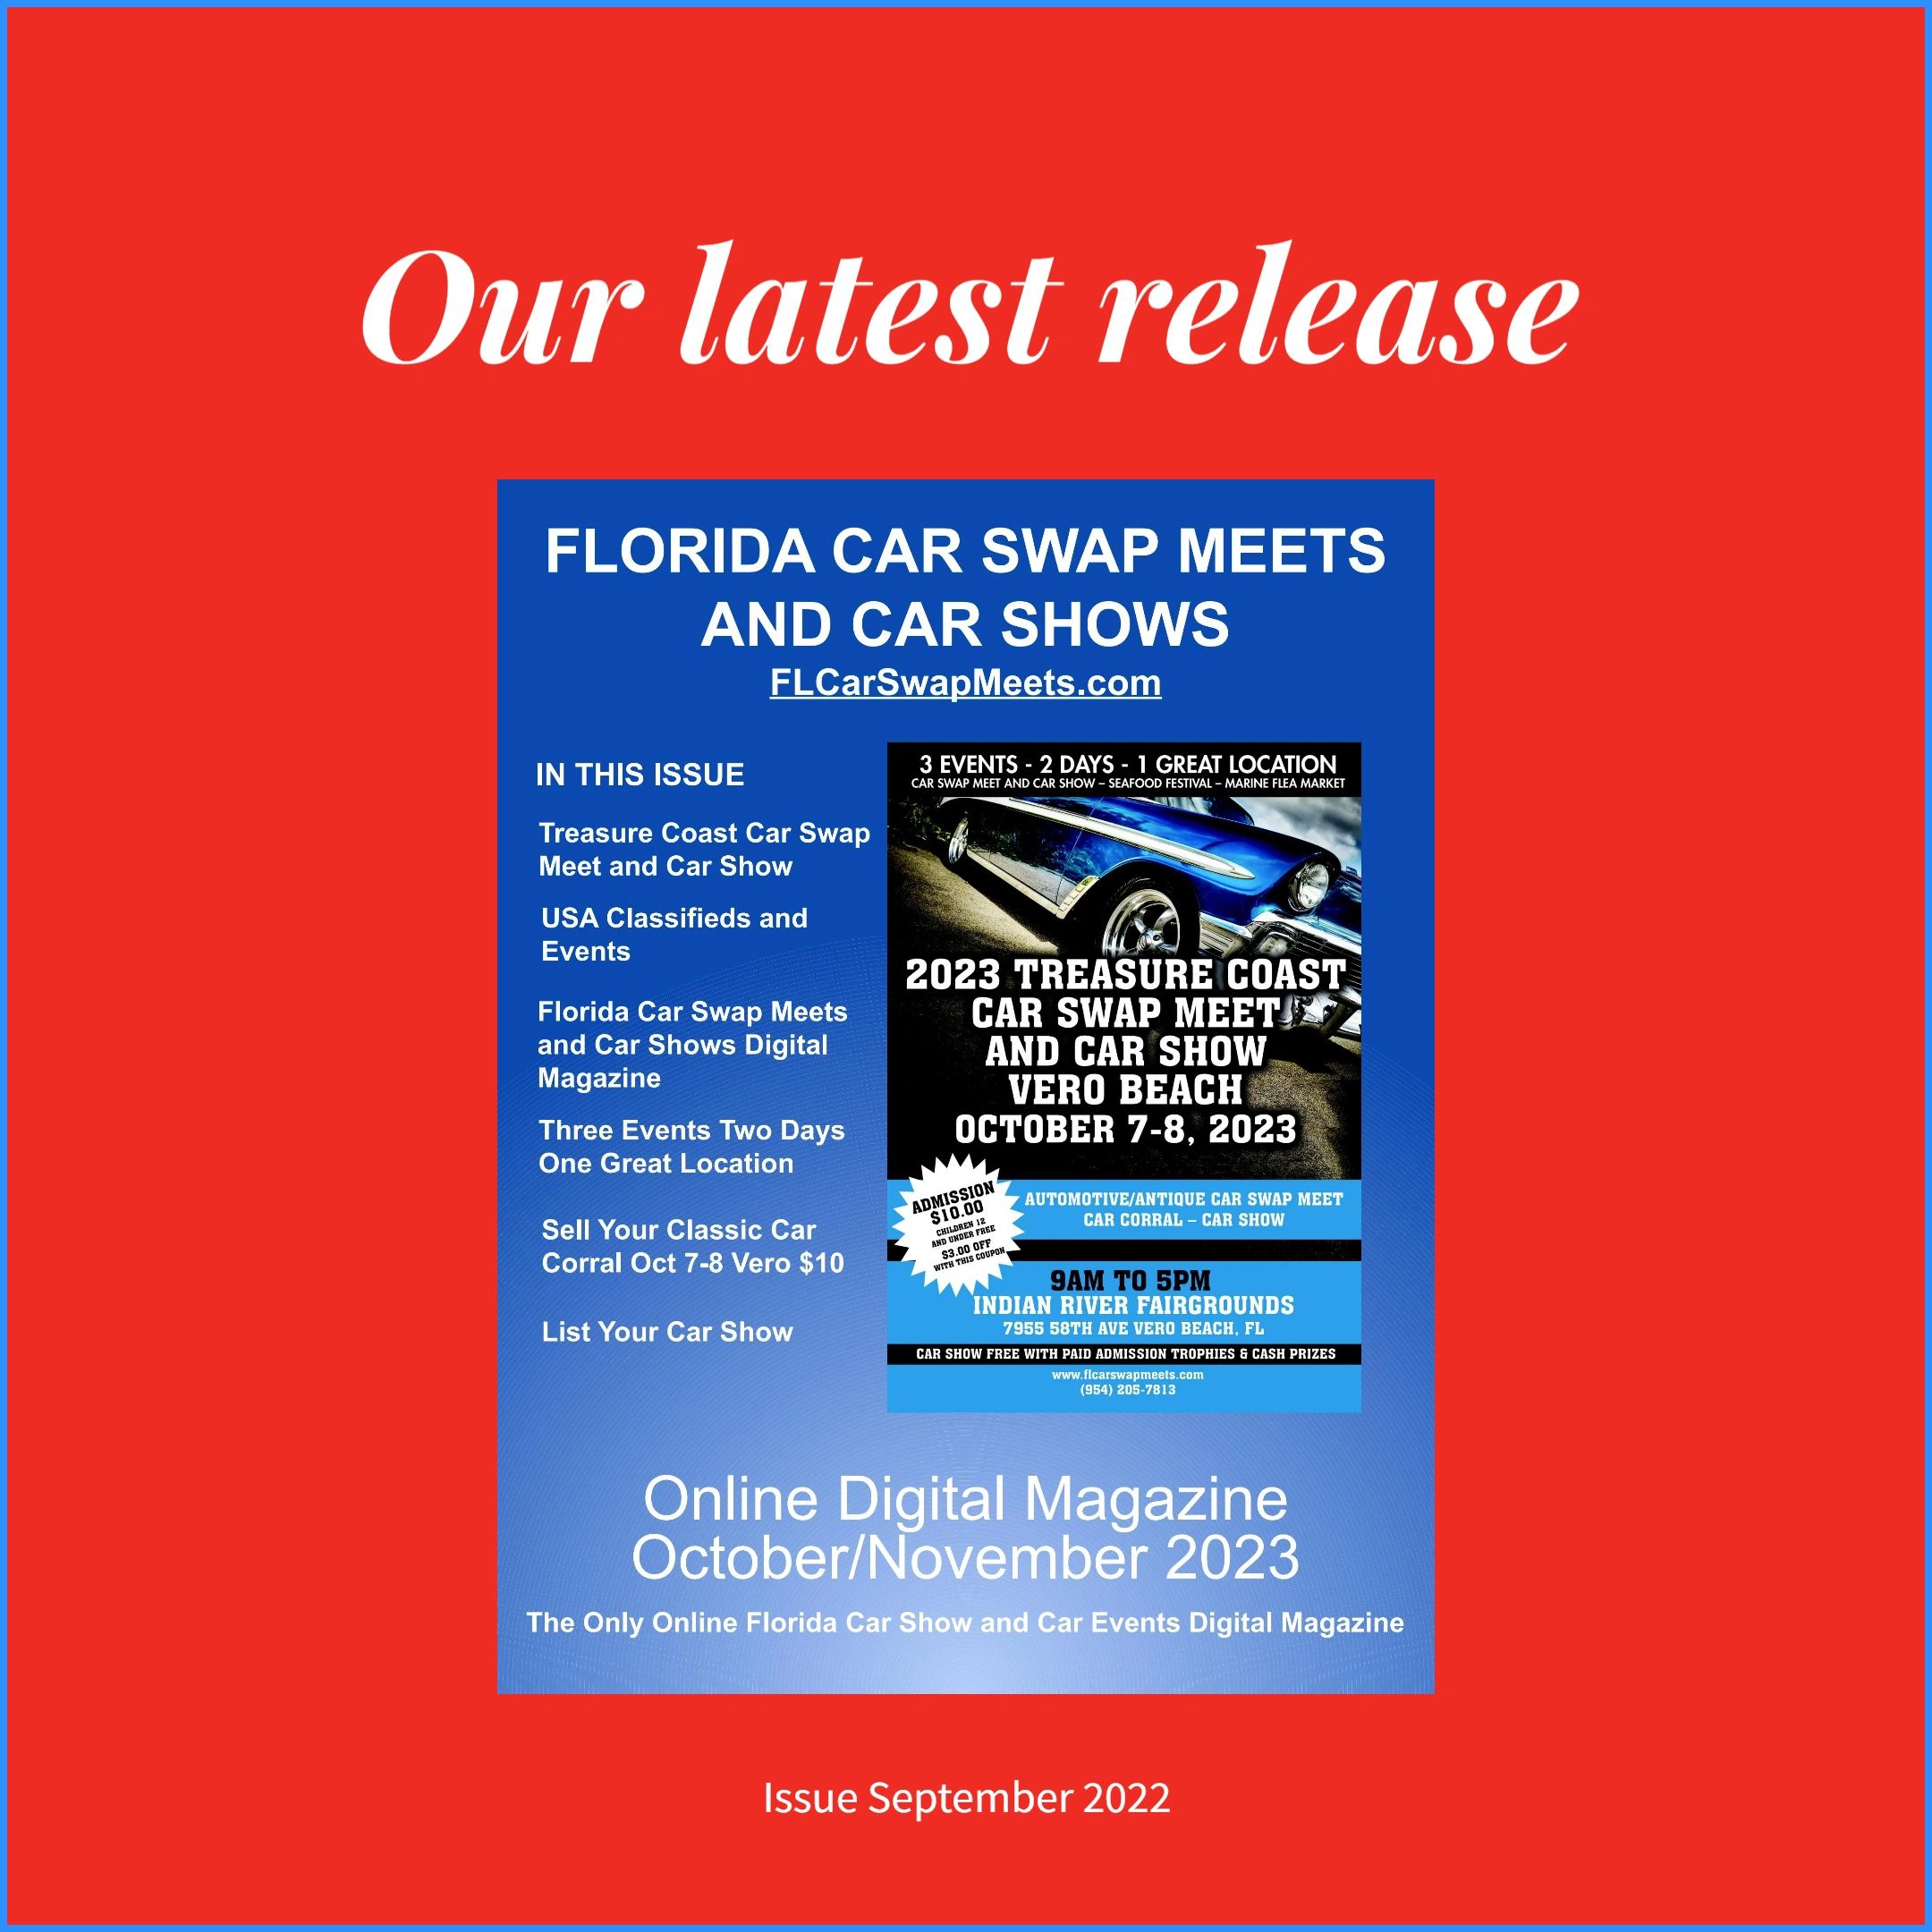 Get Ready for the Florida Car Swap Meets and Shows Digital Mag